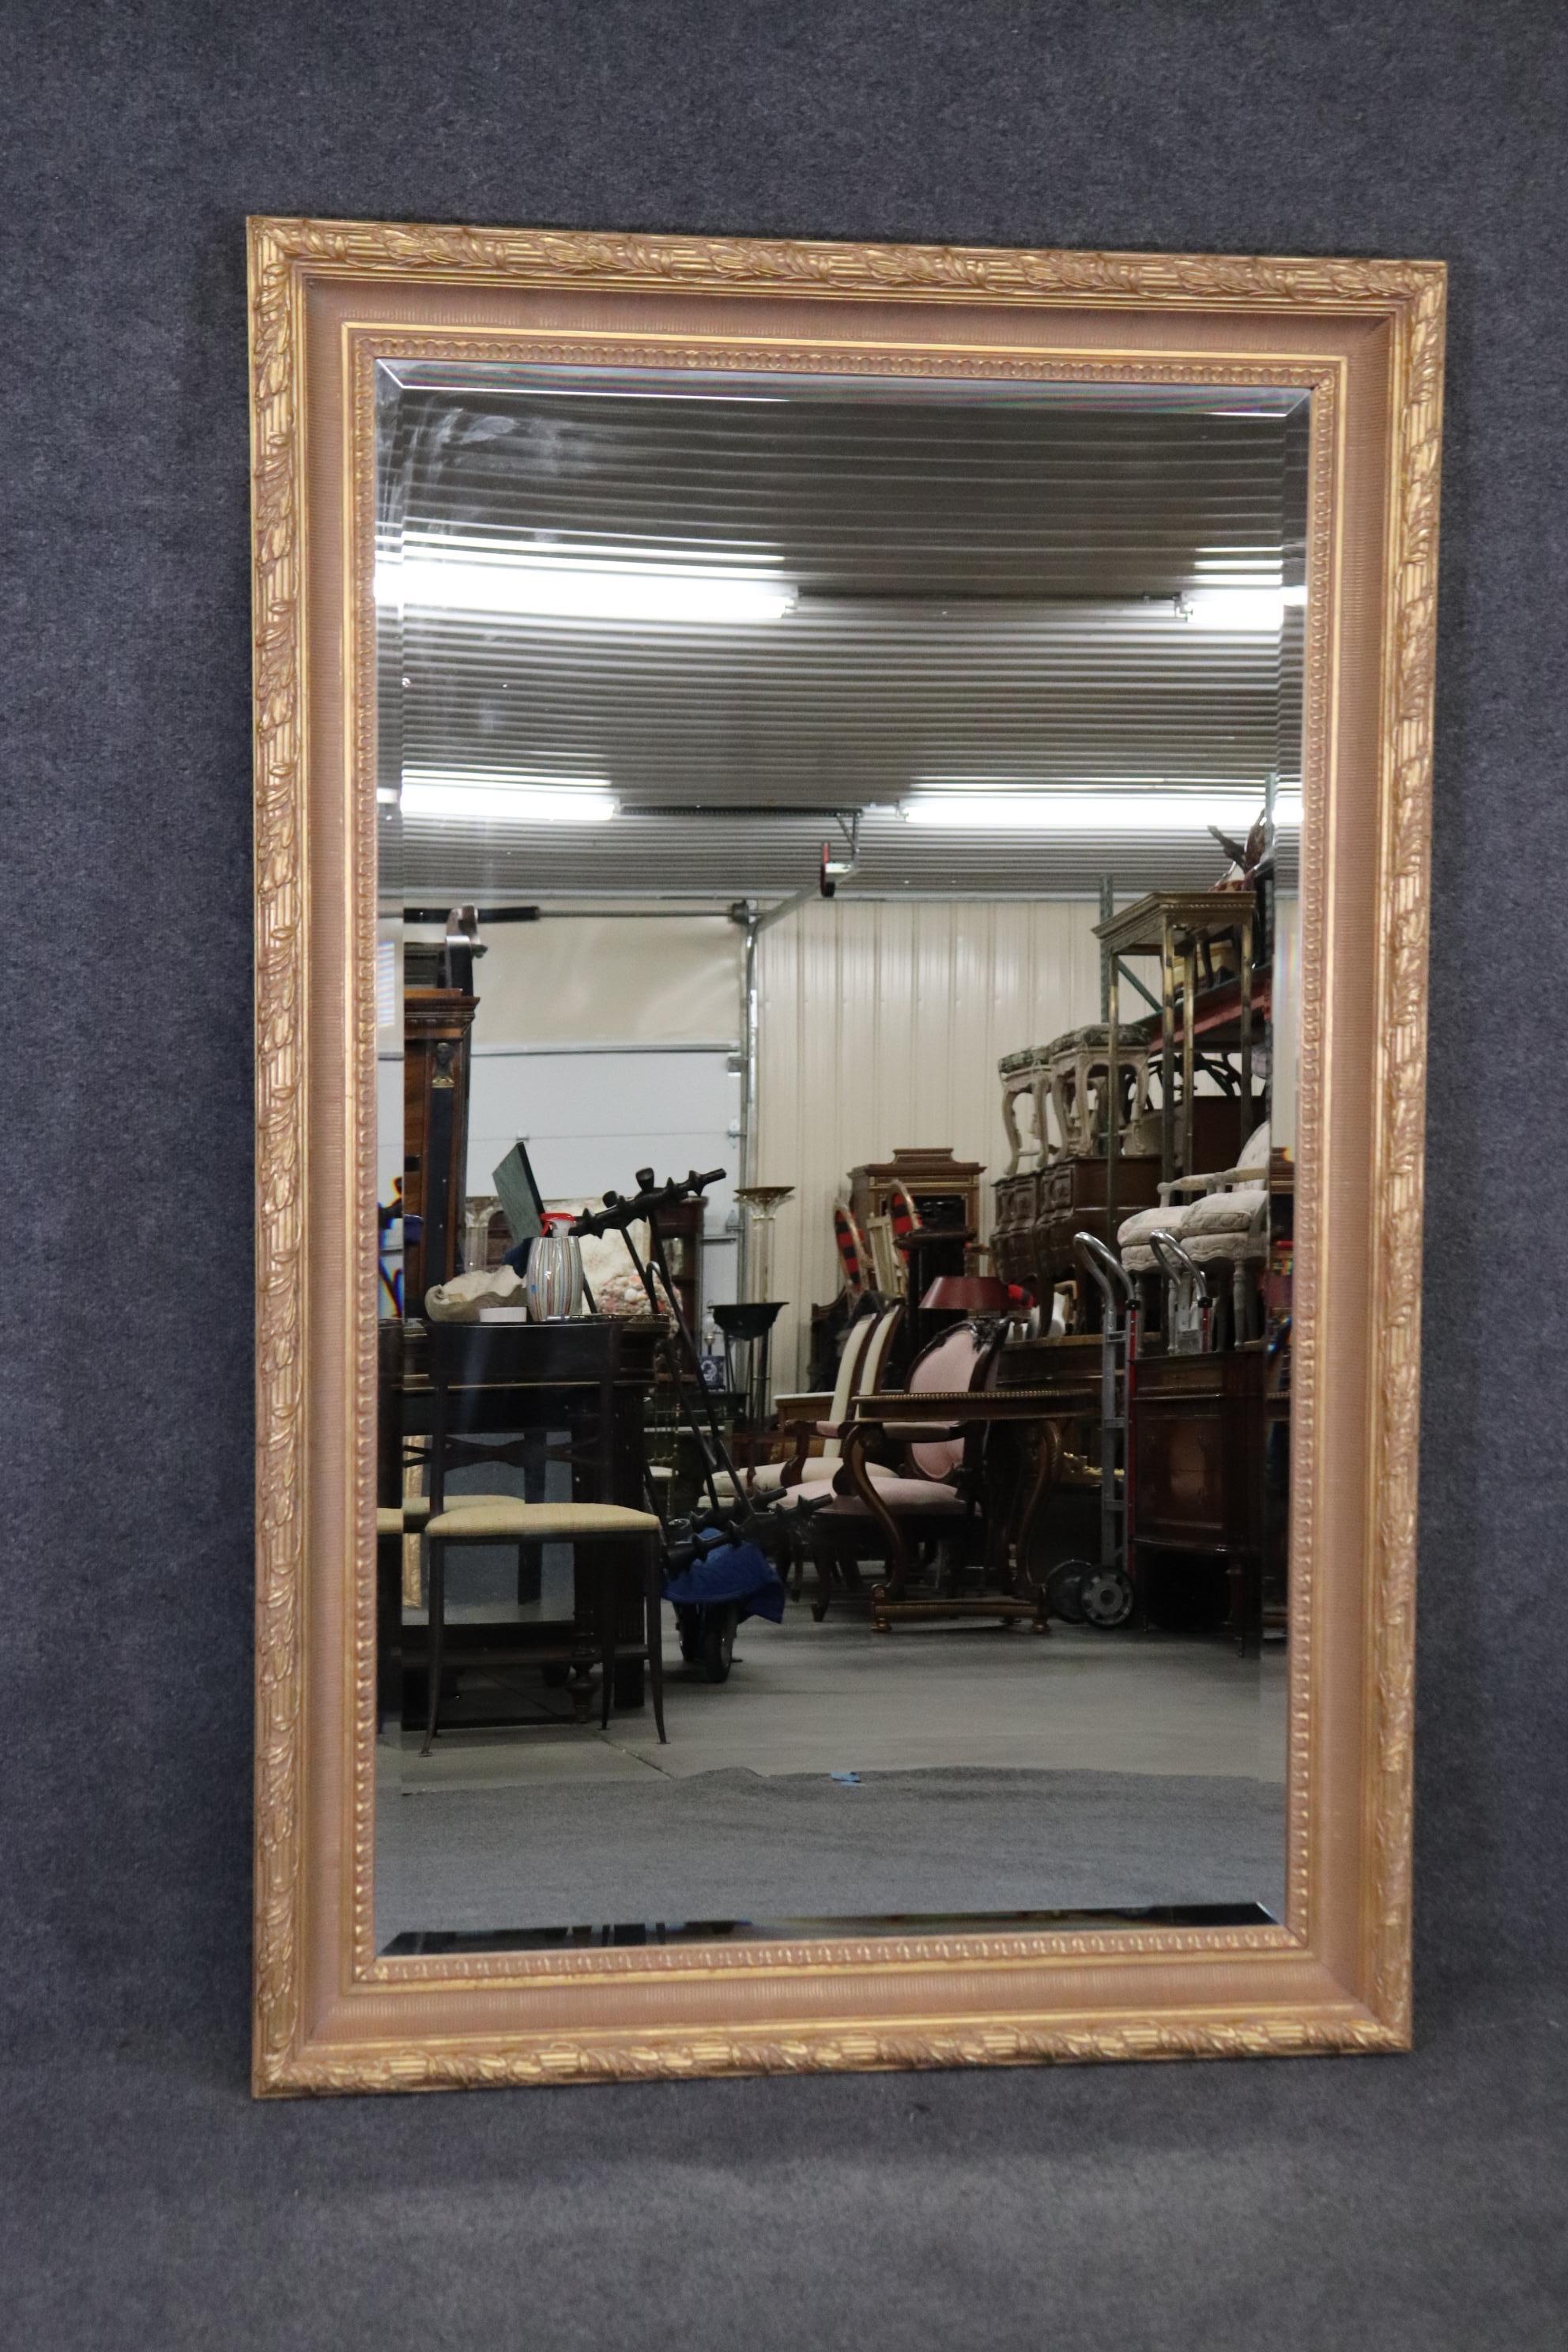 Dimensions- H: 44 1/2in W: 69in D: 3in 
This Large Gold Gilt Beveled Glass Mirror by Labarge is made of the highest quality and is perfect if you are looking for a large mirror with class and elegance! This mirror is equipped with a carved gold